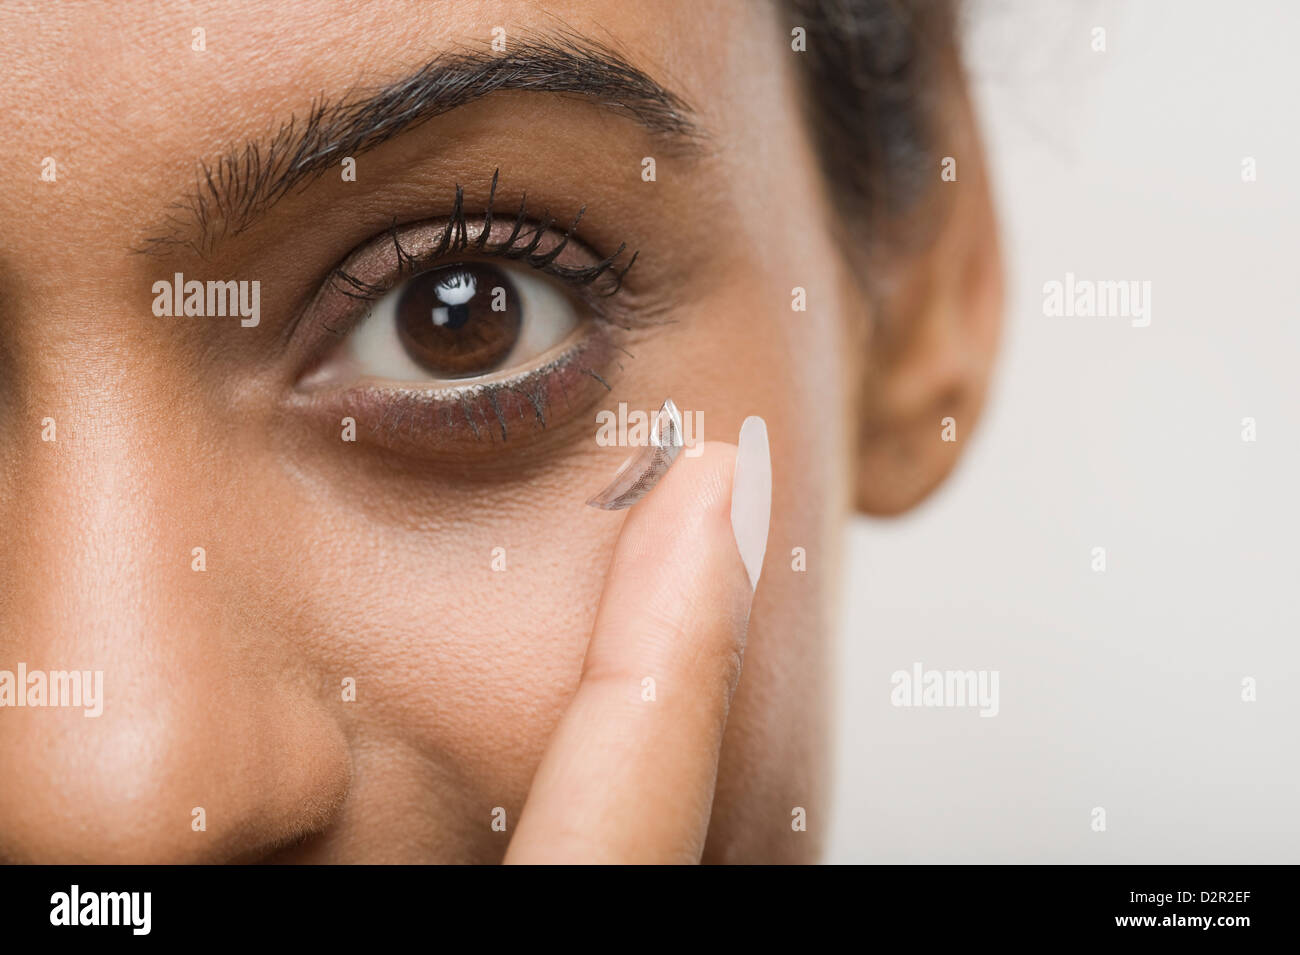 Woman putting on contact lens Banque D'Images